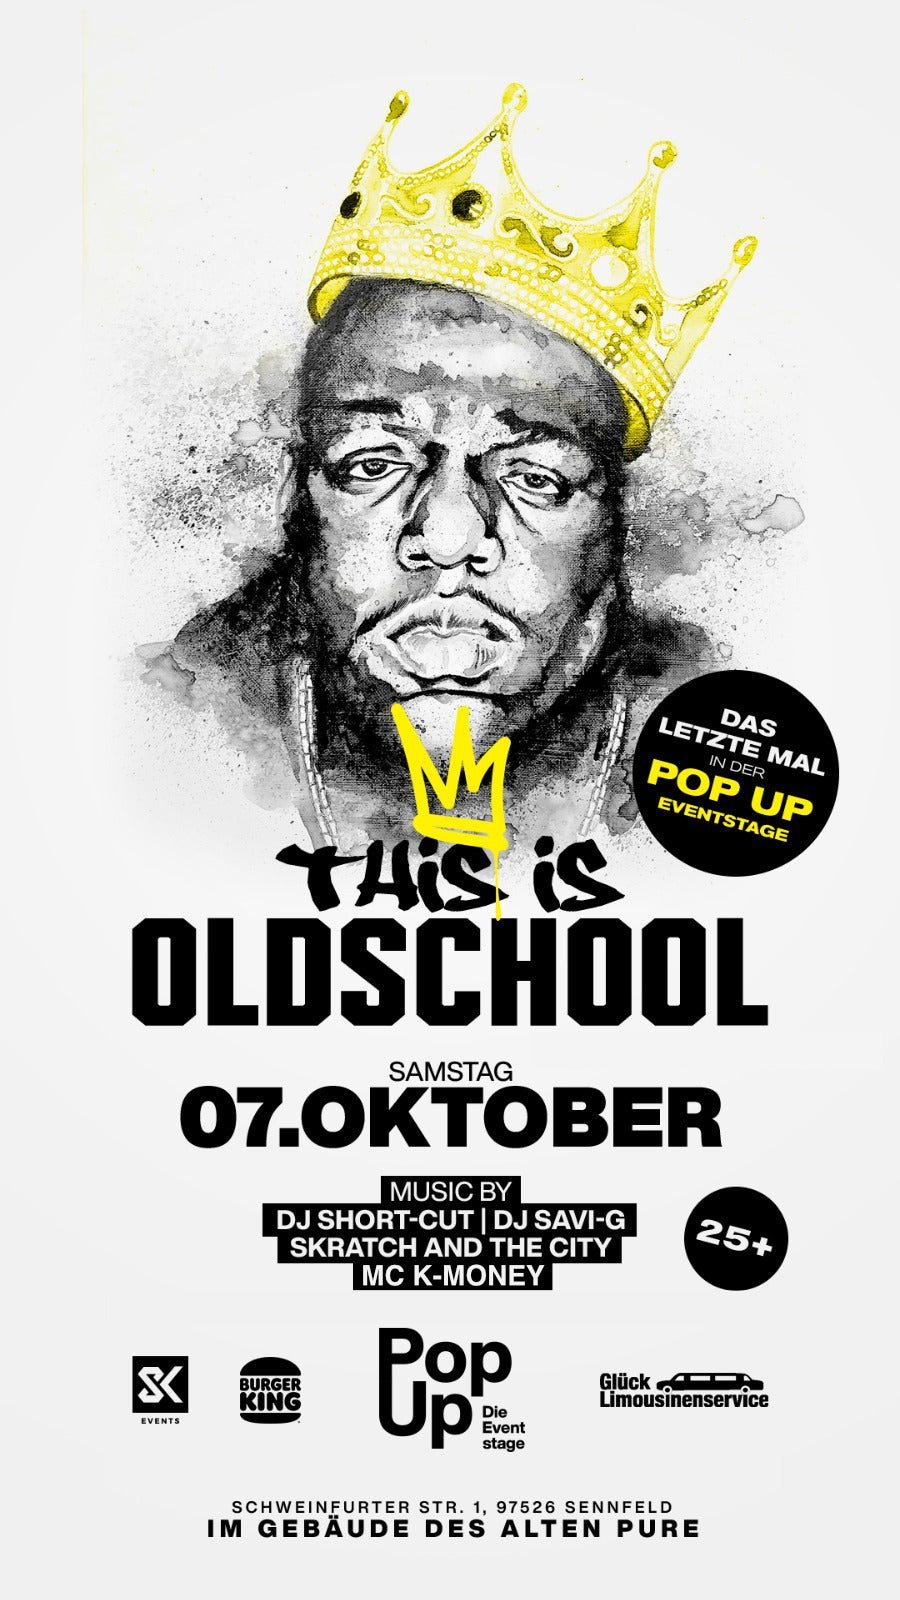 This is Oldschool - Strictly Hip Hop & RnB Classics 25+